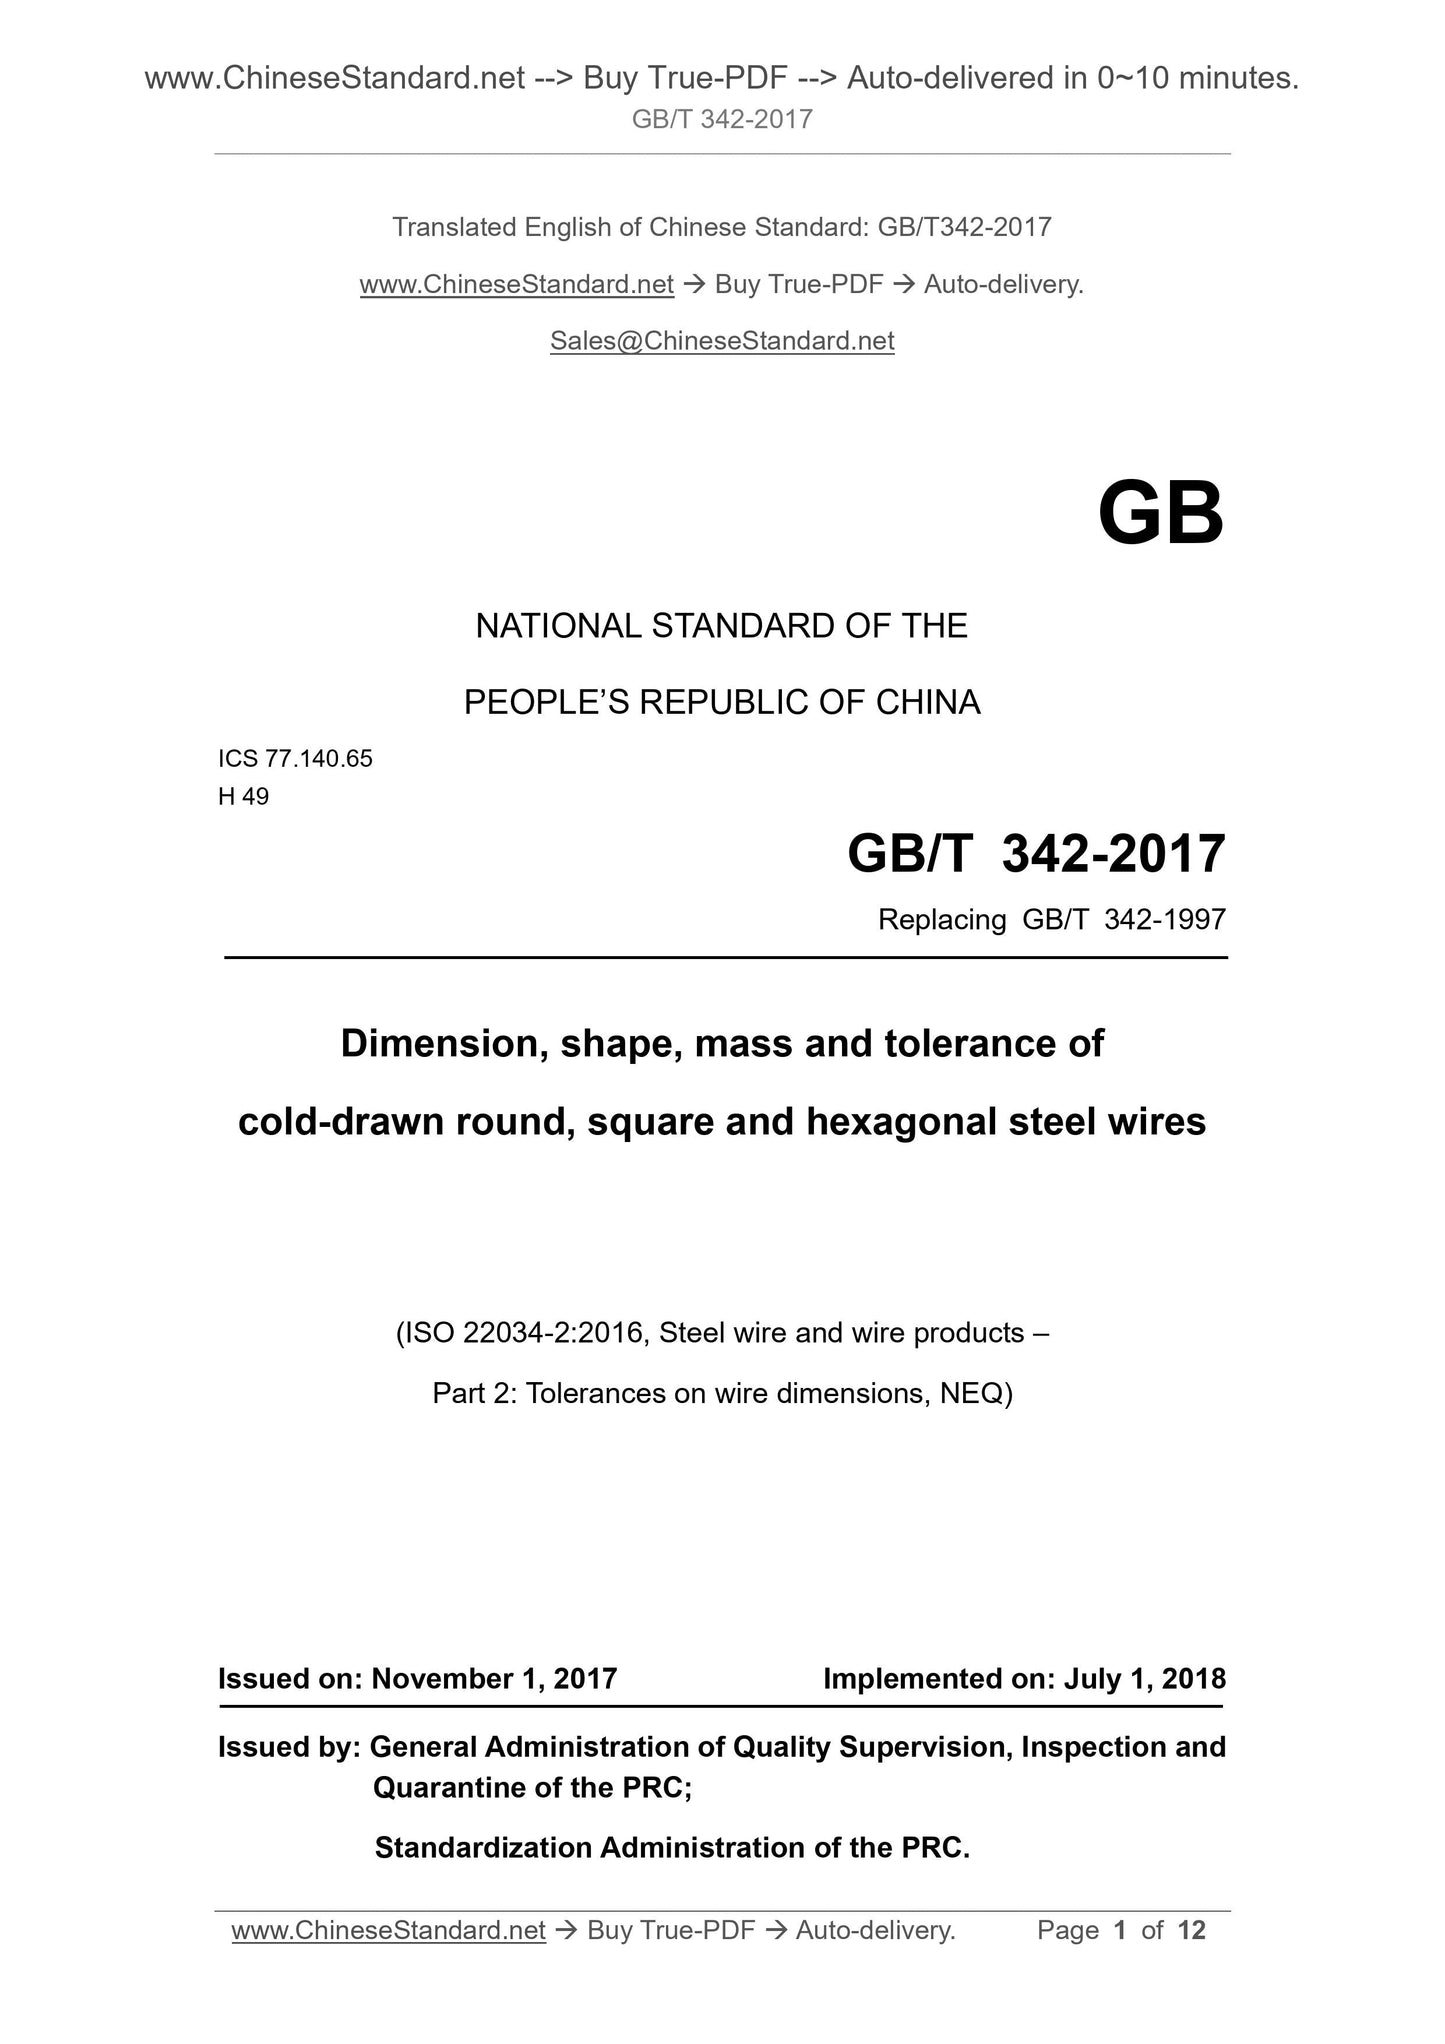 GB/T 342-2017 Page 1